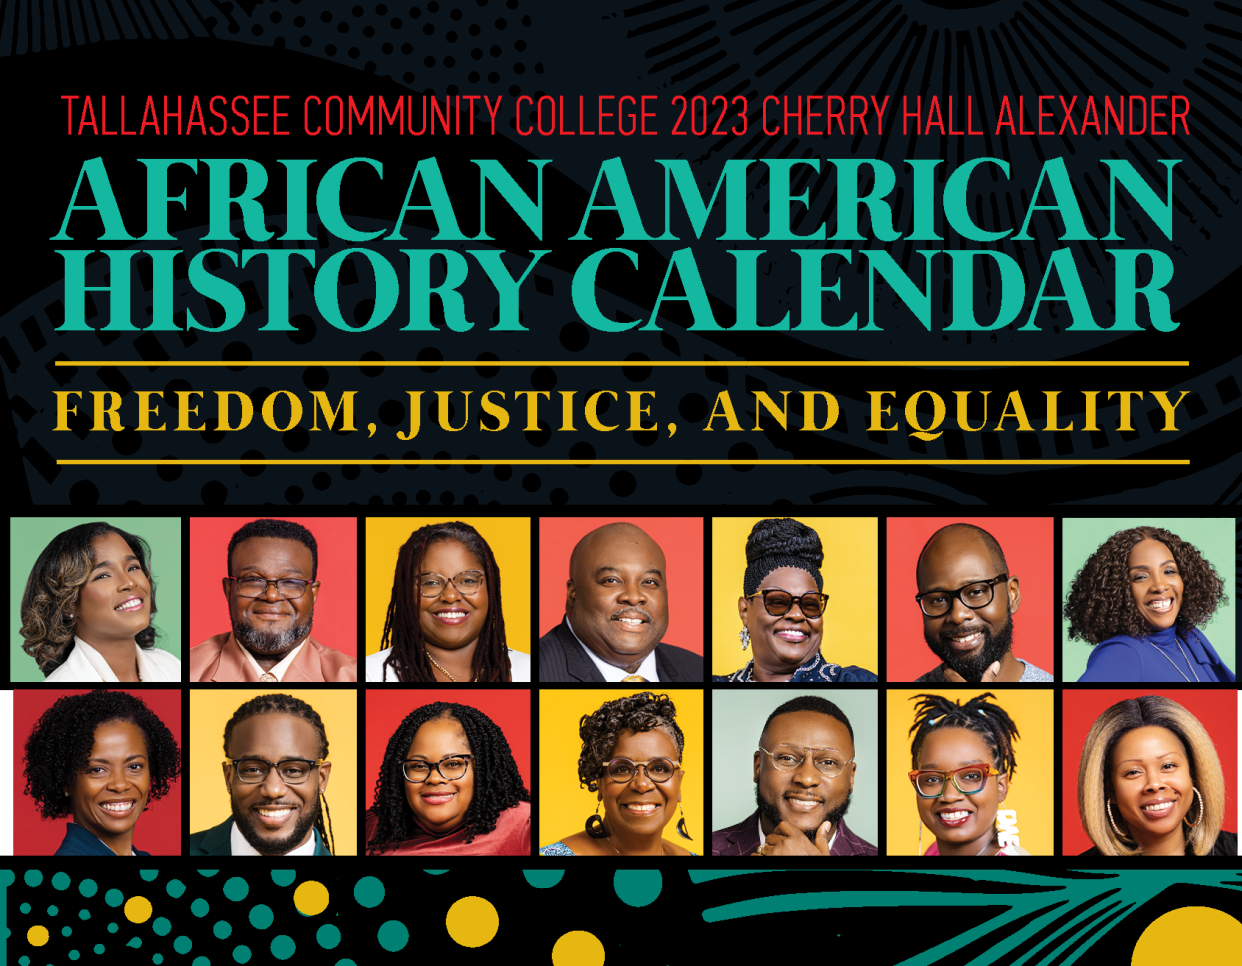 TCC's 23rd annual Cherry Hall Alexander African American History Calendar theme is “Freedom, Justice, Equality."